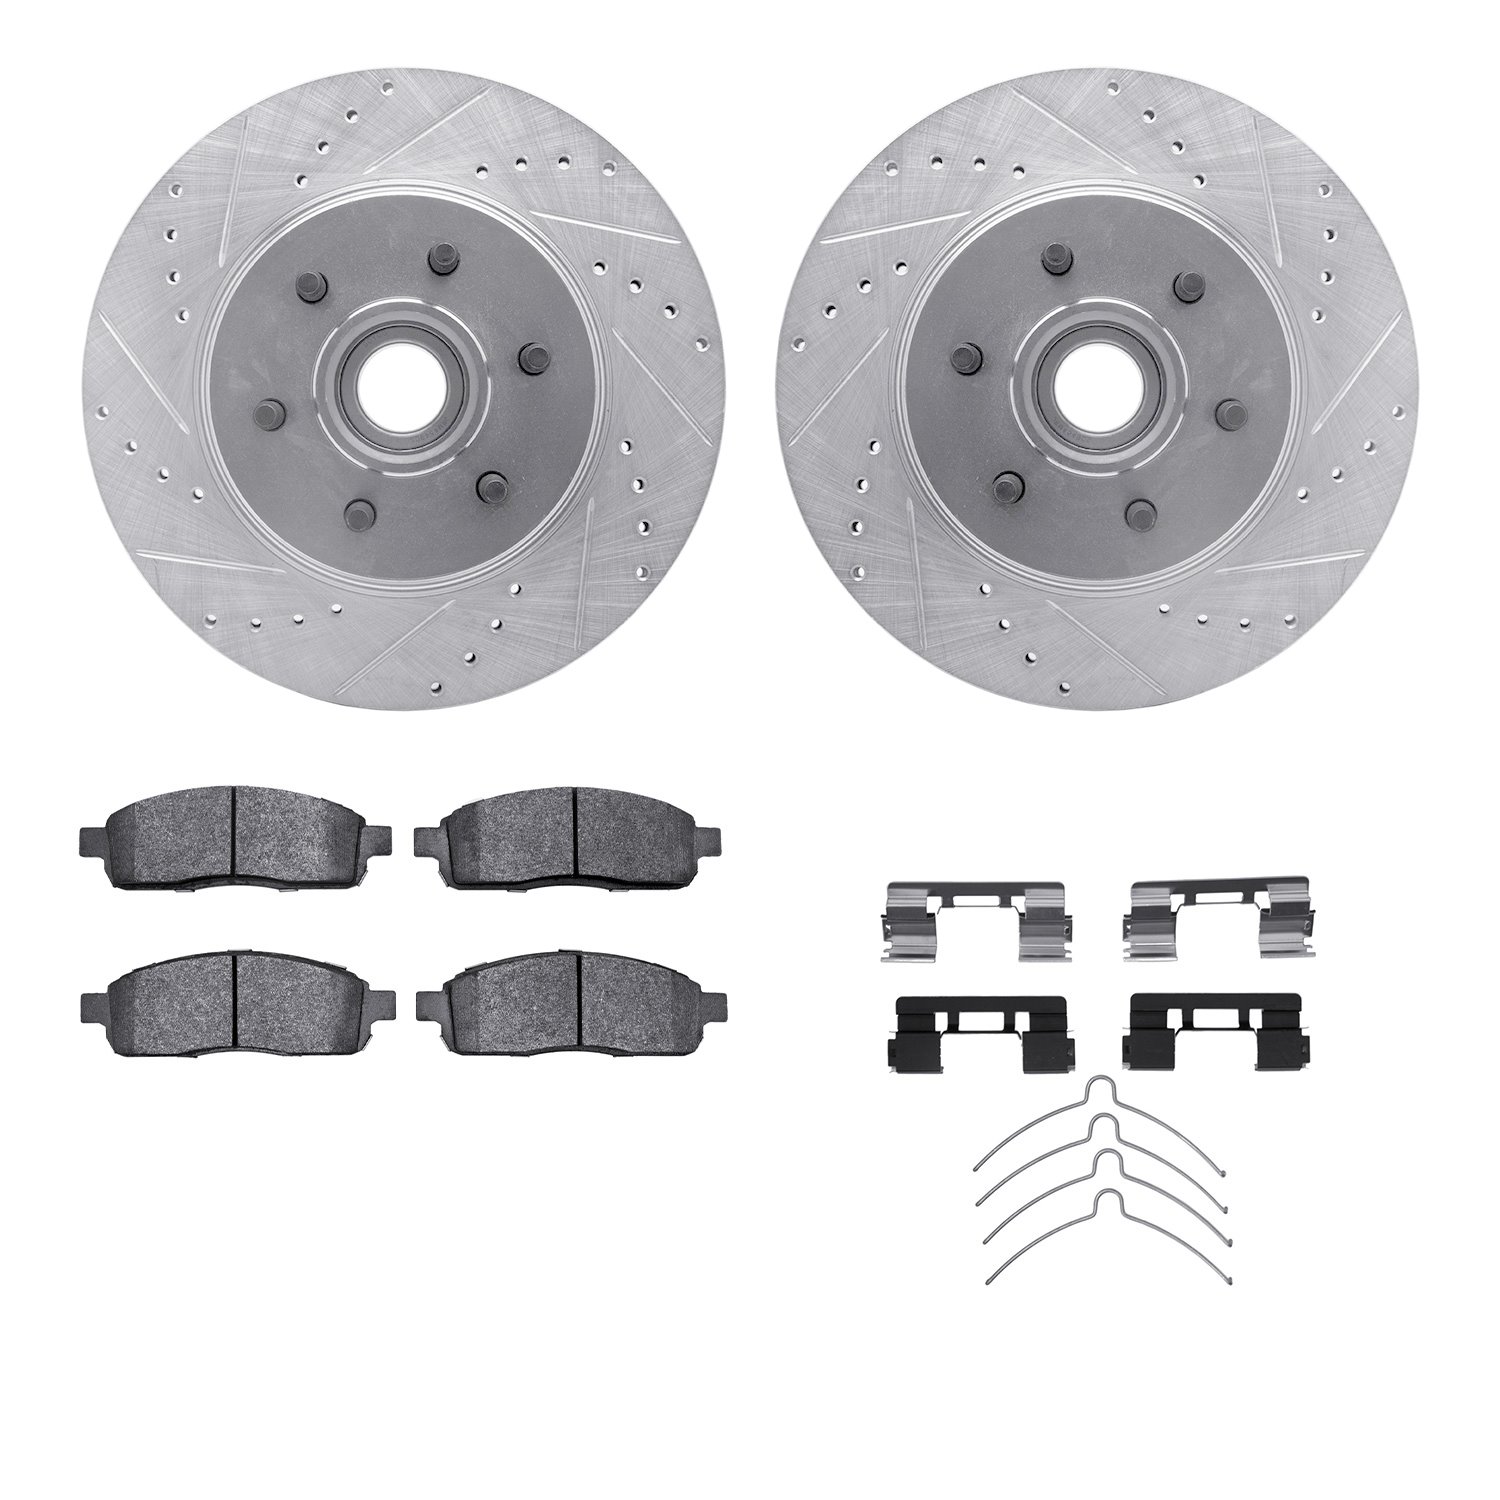 7412-54071 Drilled/Slotted Brake Rotors with Ultimate-Duty Brake Pads Kit & Hardware [Silver], 2004-2008 Ford/Lincoln/Mercury/Ma